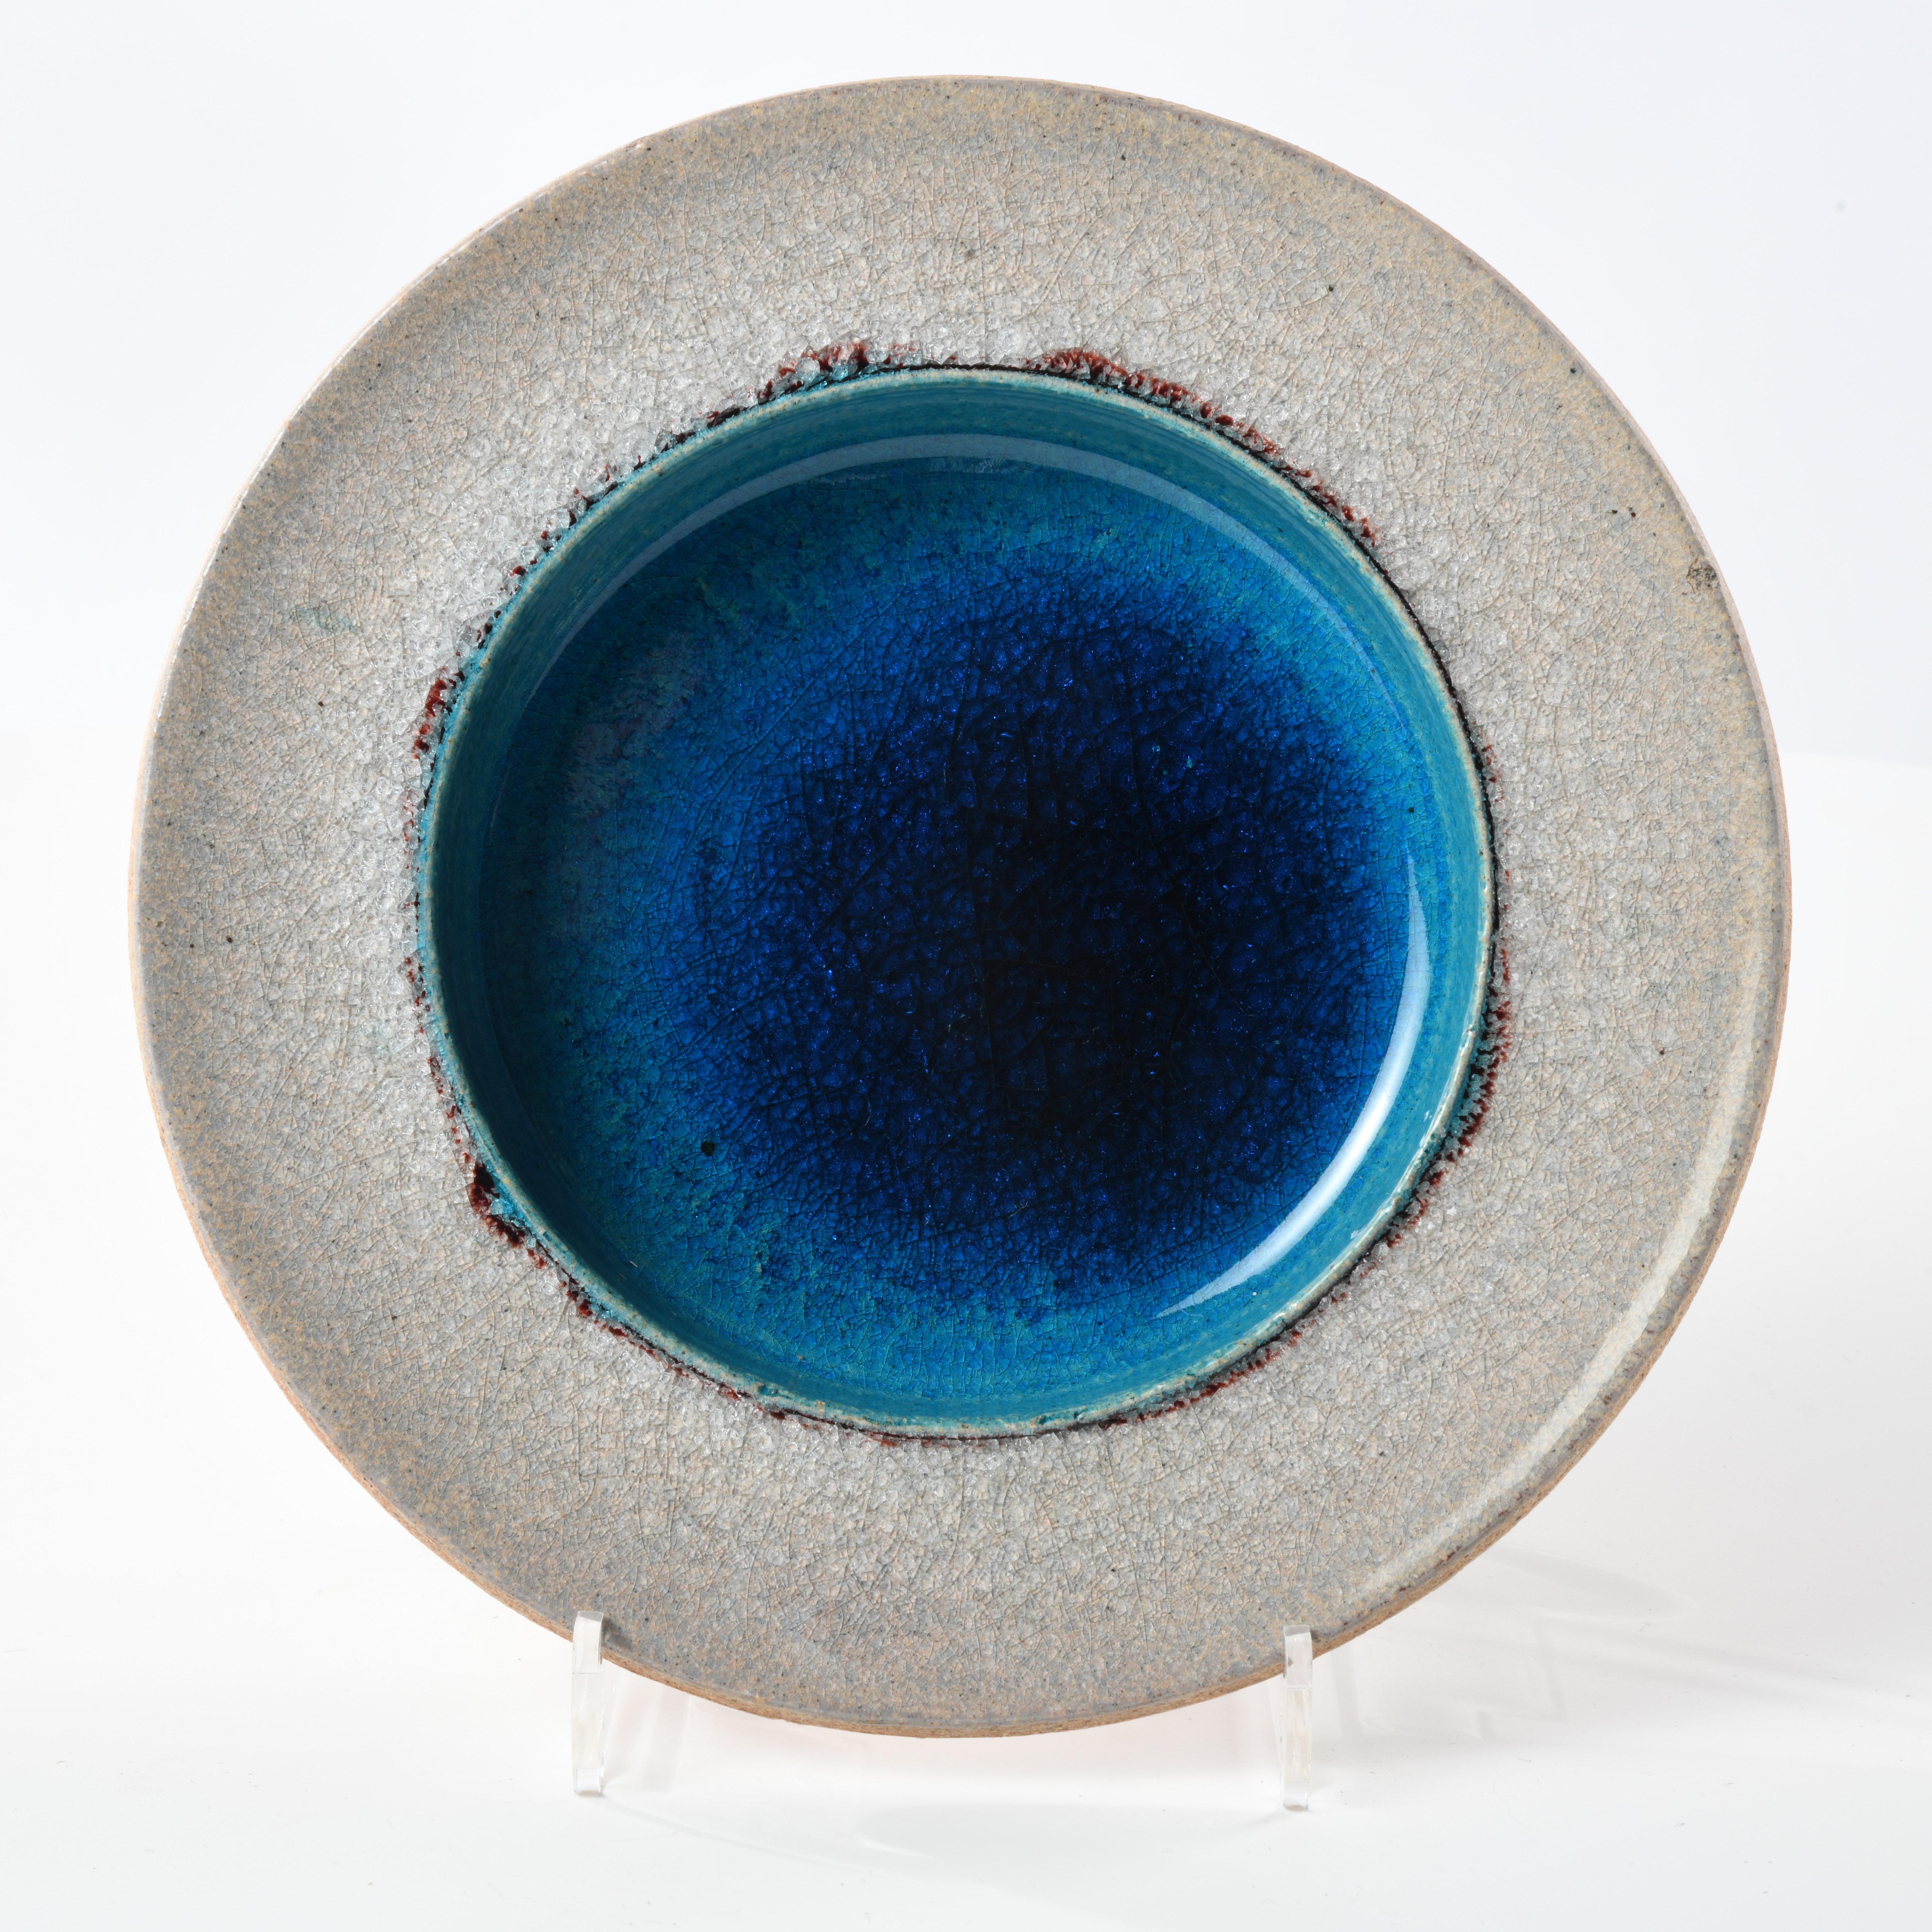 Small stoneware dish glazed in the 1960s in Denmark, signed Nils Kähler (1906-1979). Beautiful two-tone glaze, light grey with deep midnight blue and turquoise tones. Signature and label underneath. 
The Kähler factory was founded in Denmark in 1839